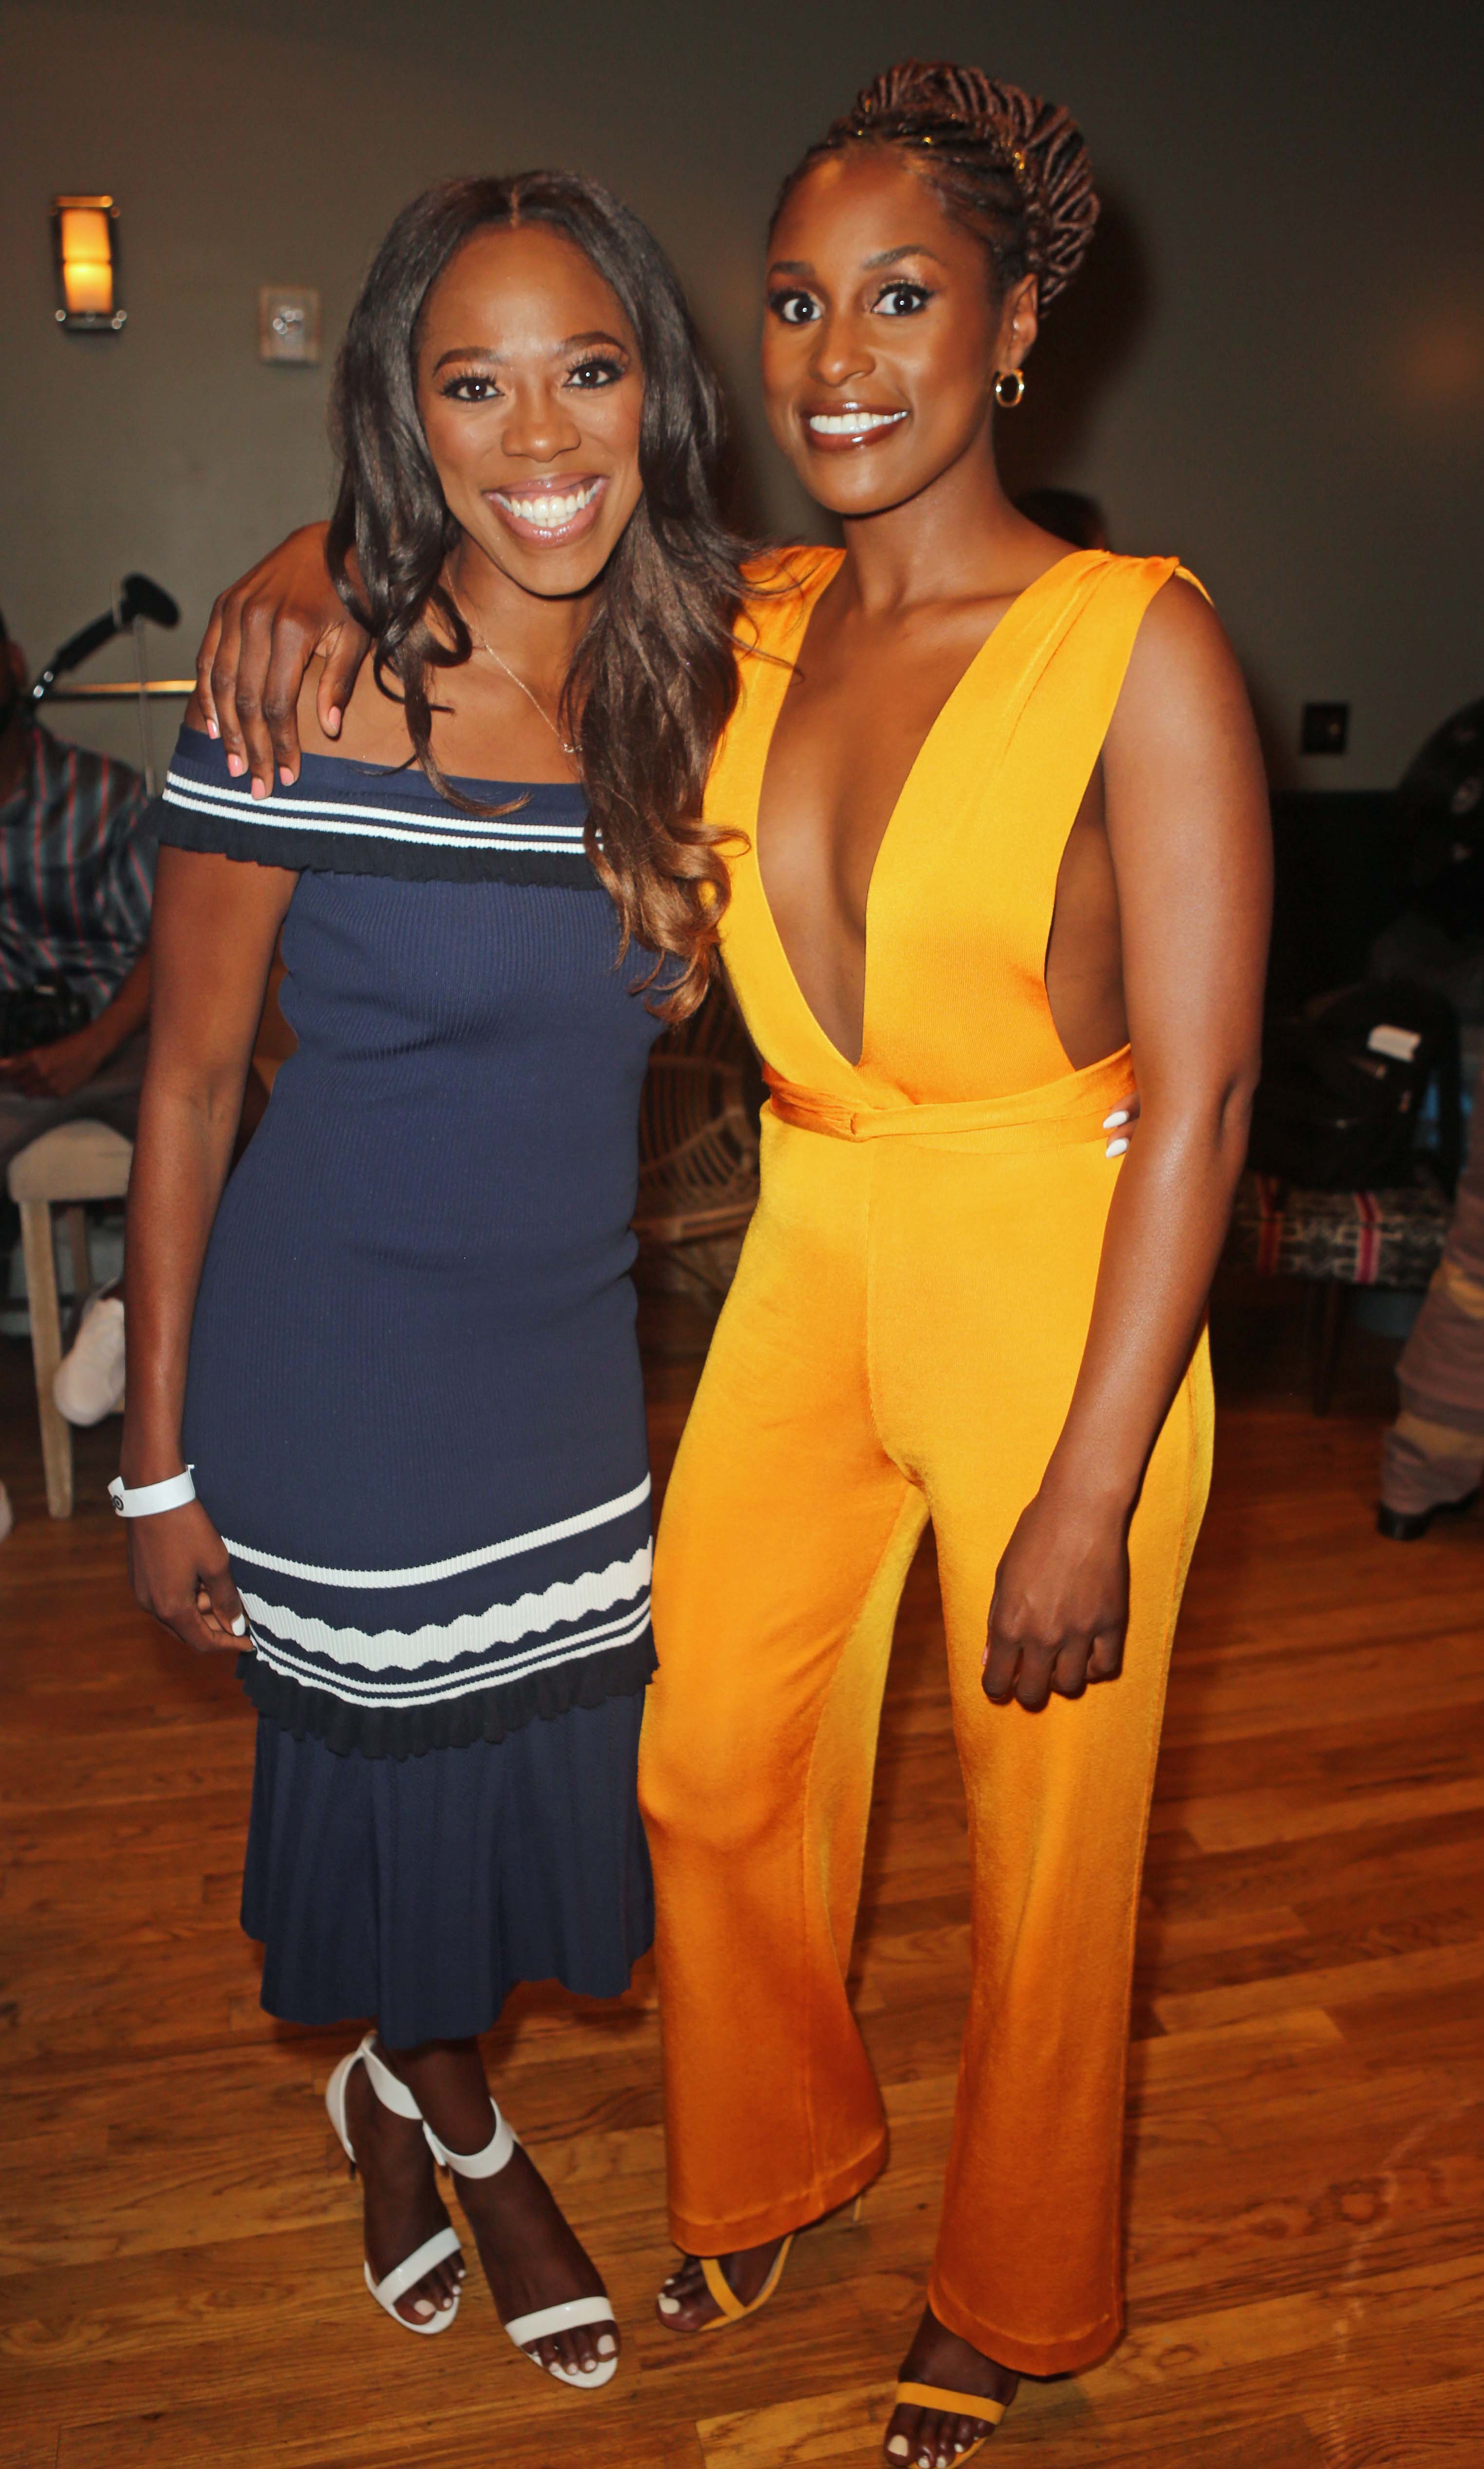 Ain't No Party Like An 'Insecure' Party: Stars Celebrate The HBO Hit Series At ESSENCE Fest
